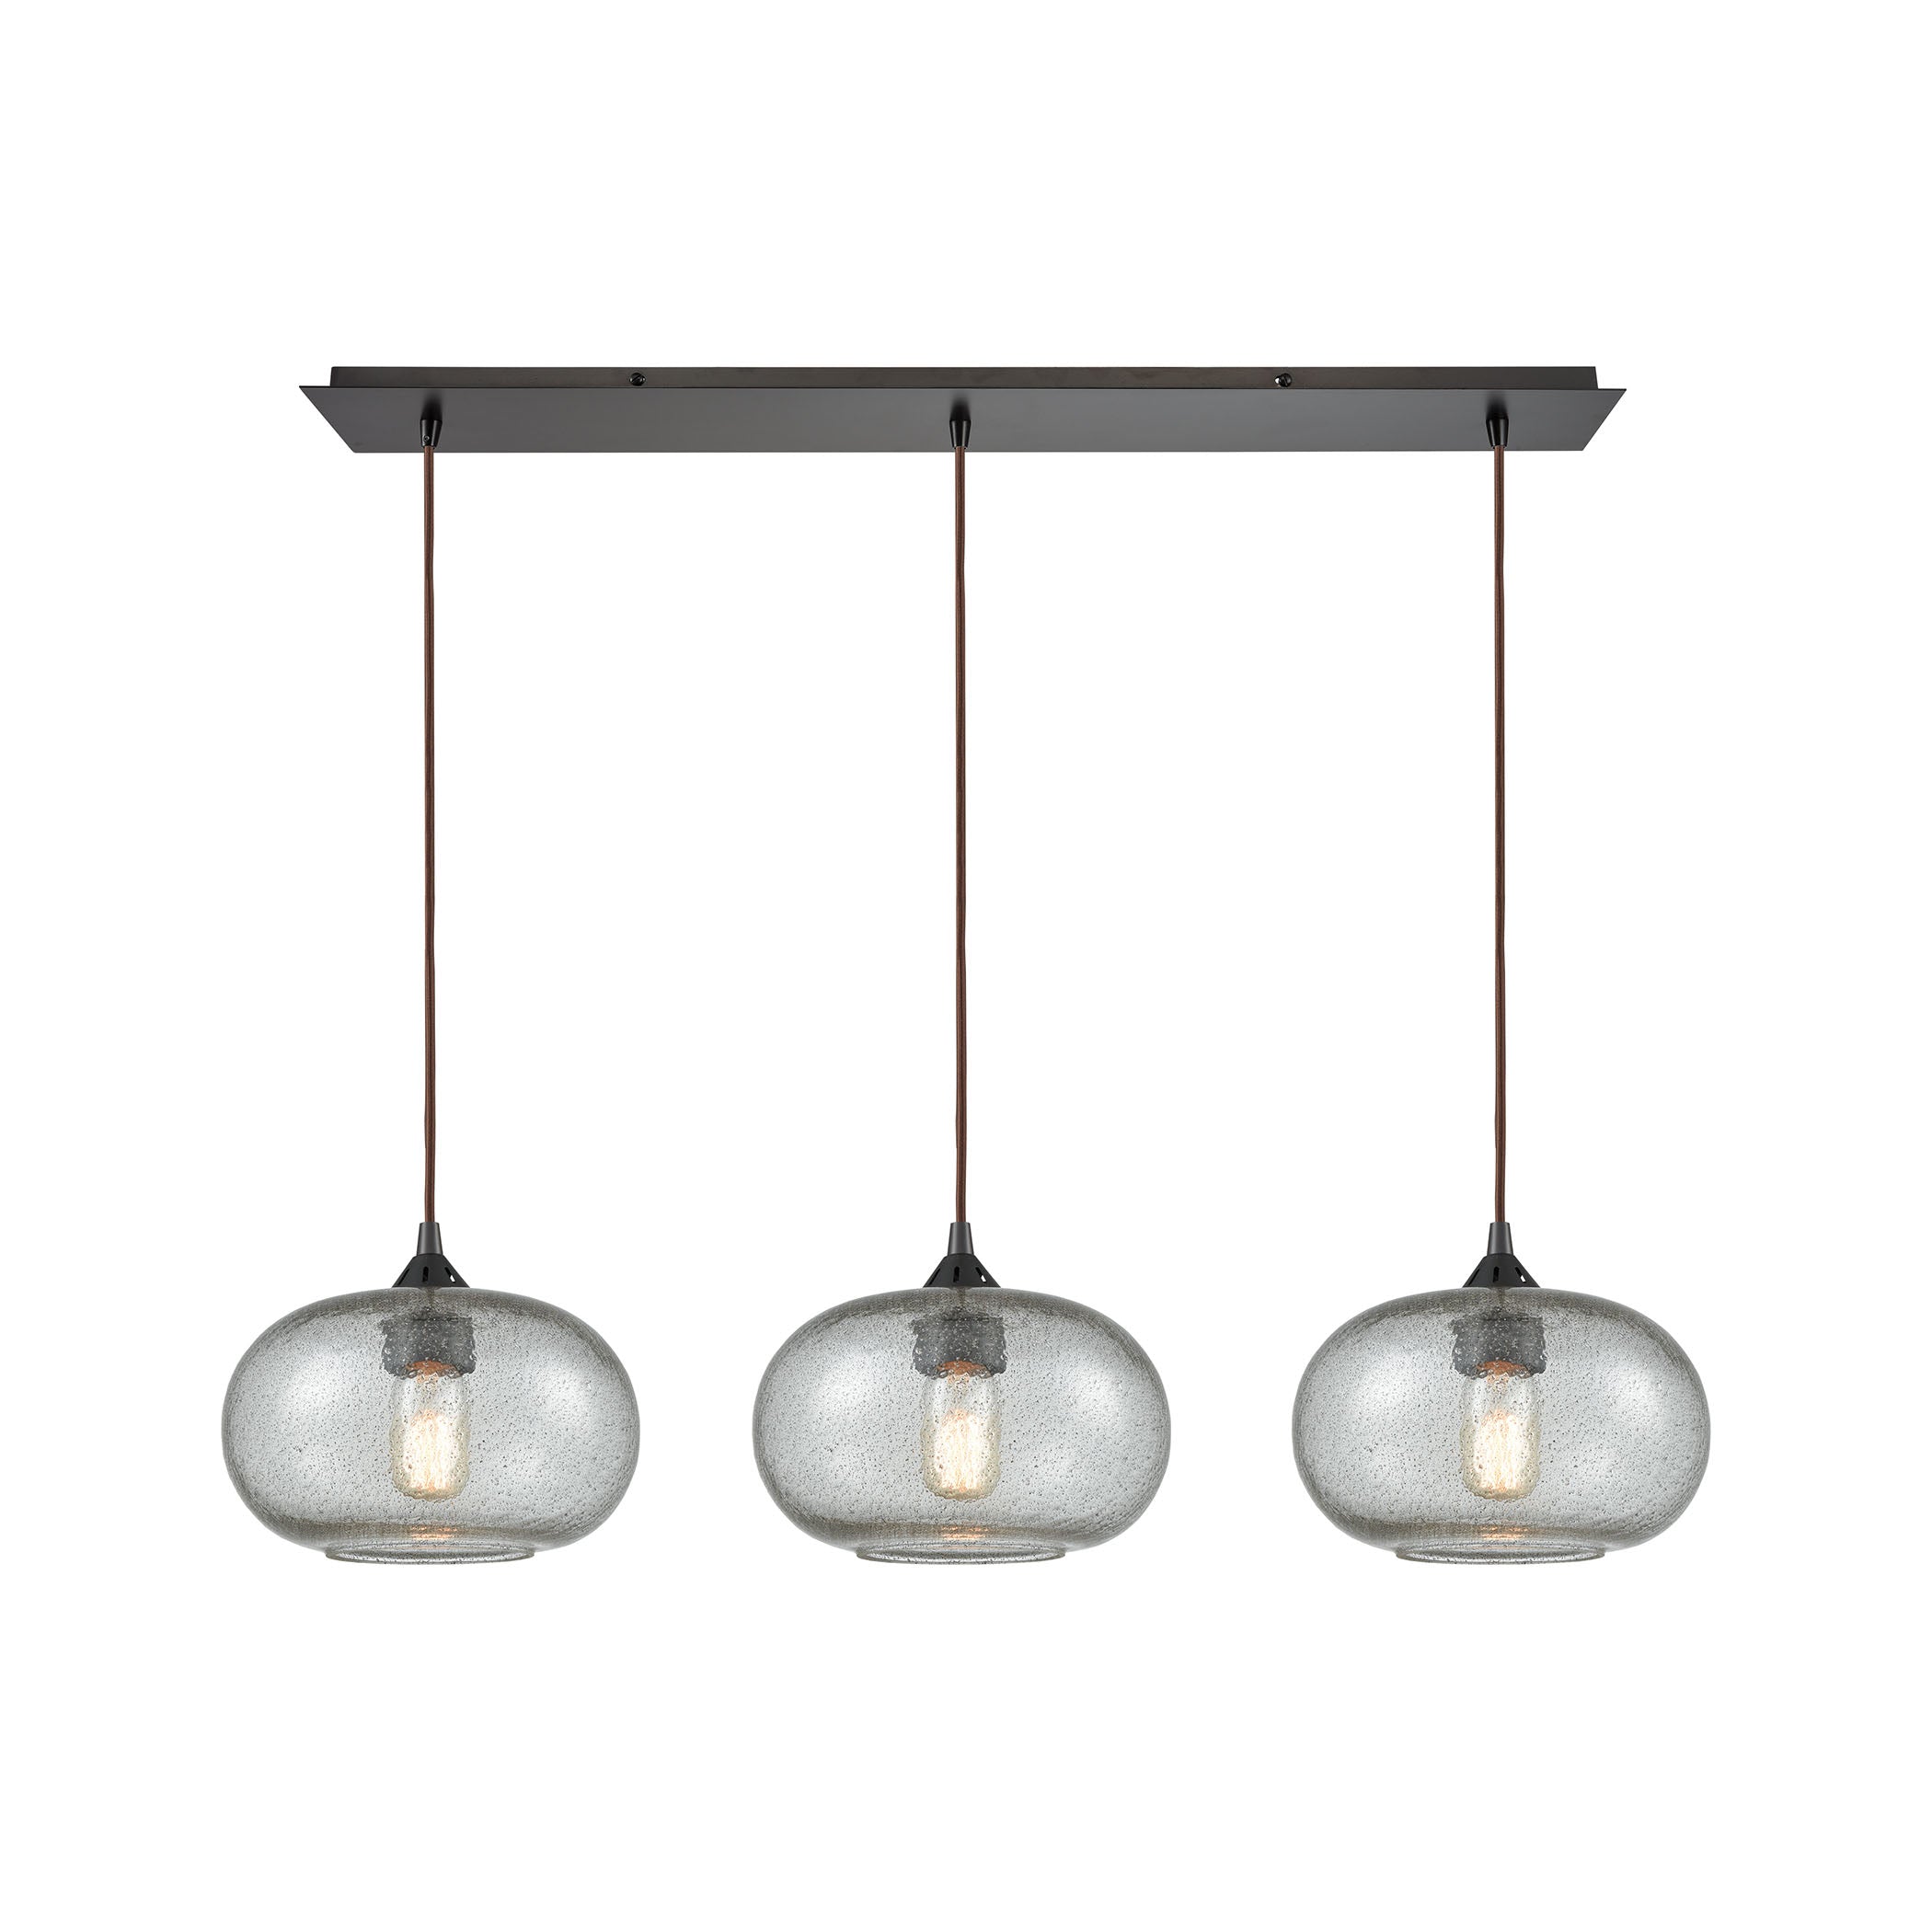 ELK Lighting 25124/3LP Volace 3-Light Linear Mini Pendant Fixture in Oiled Bronze with Rotunde Gray Speckled Blown Glass